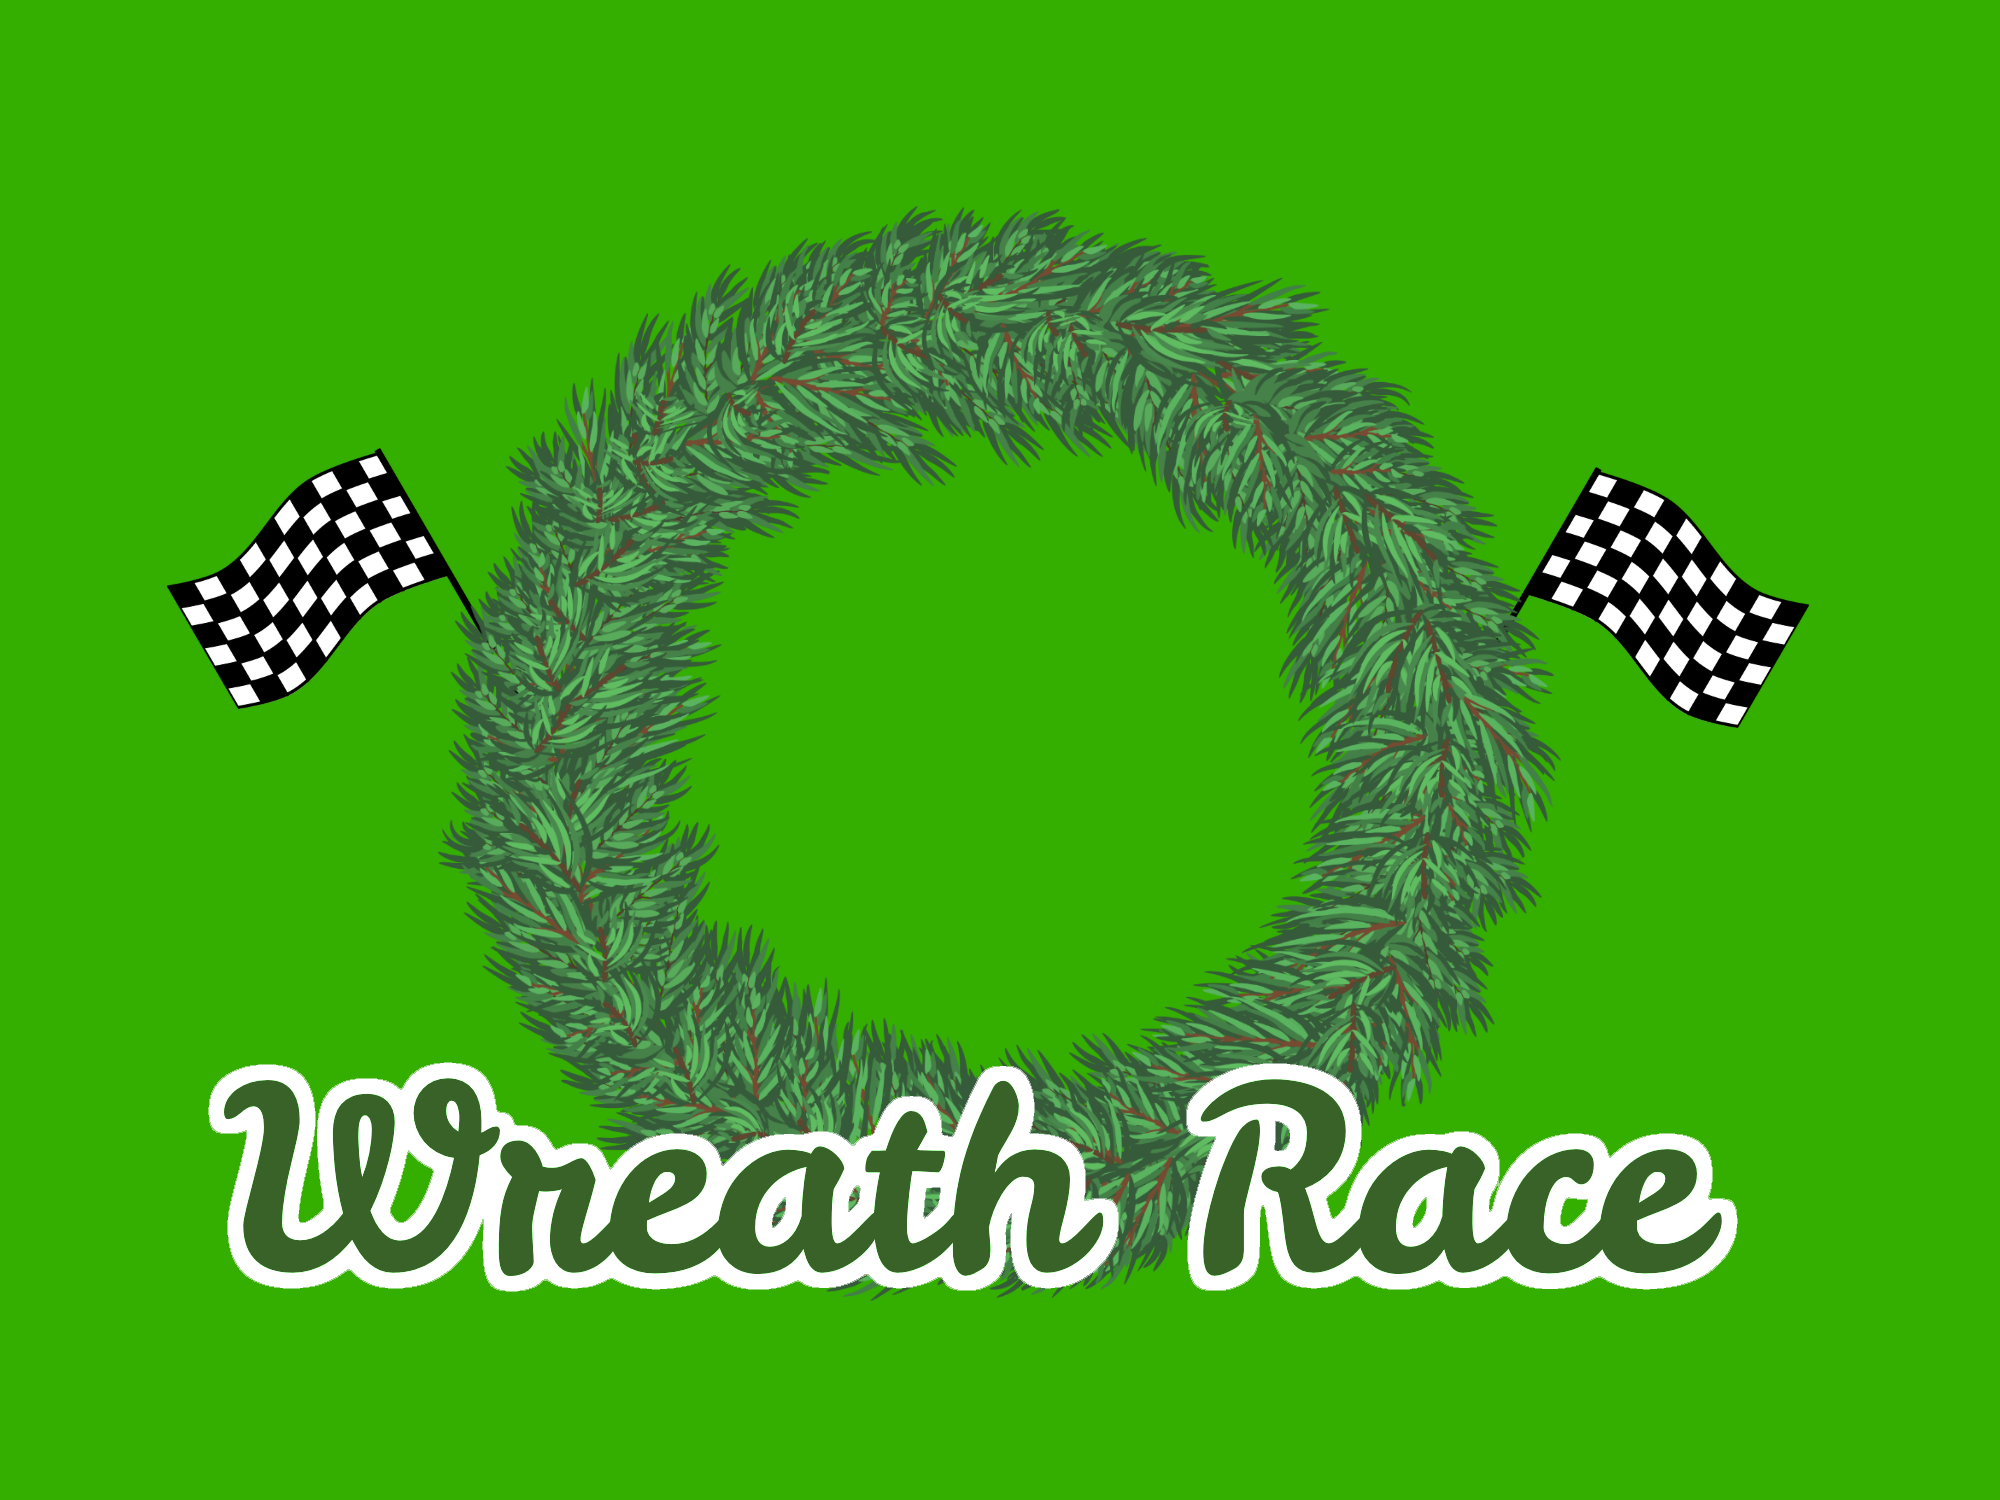 Christmas game wreath race youth group collective